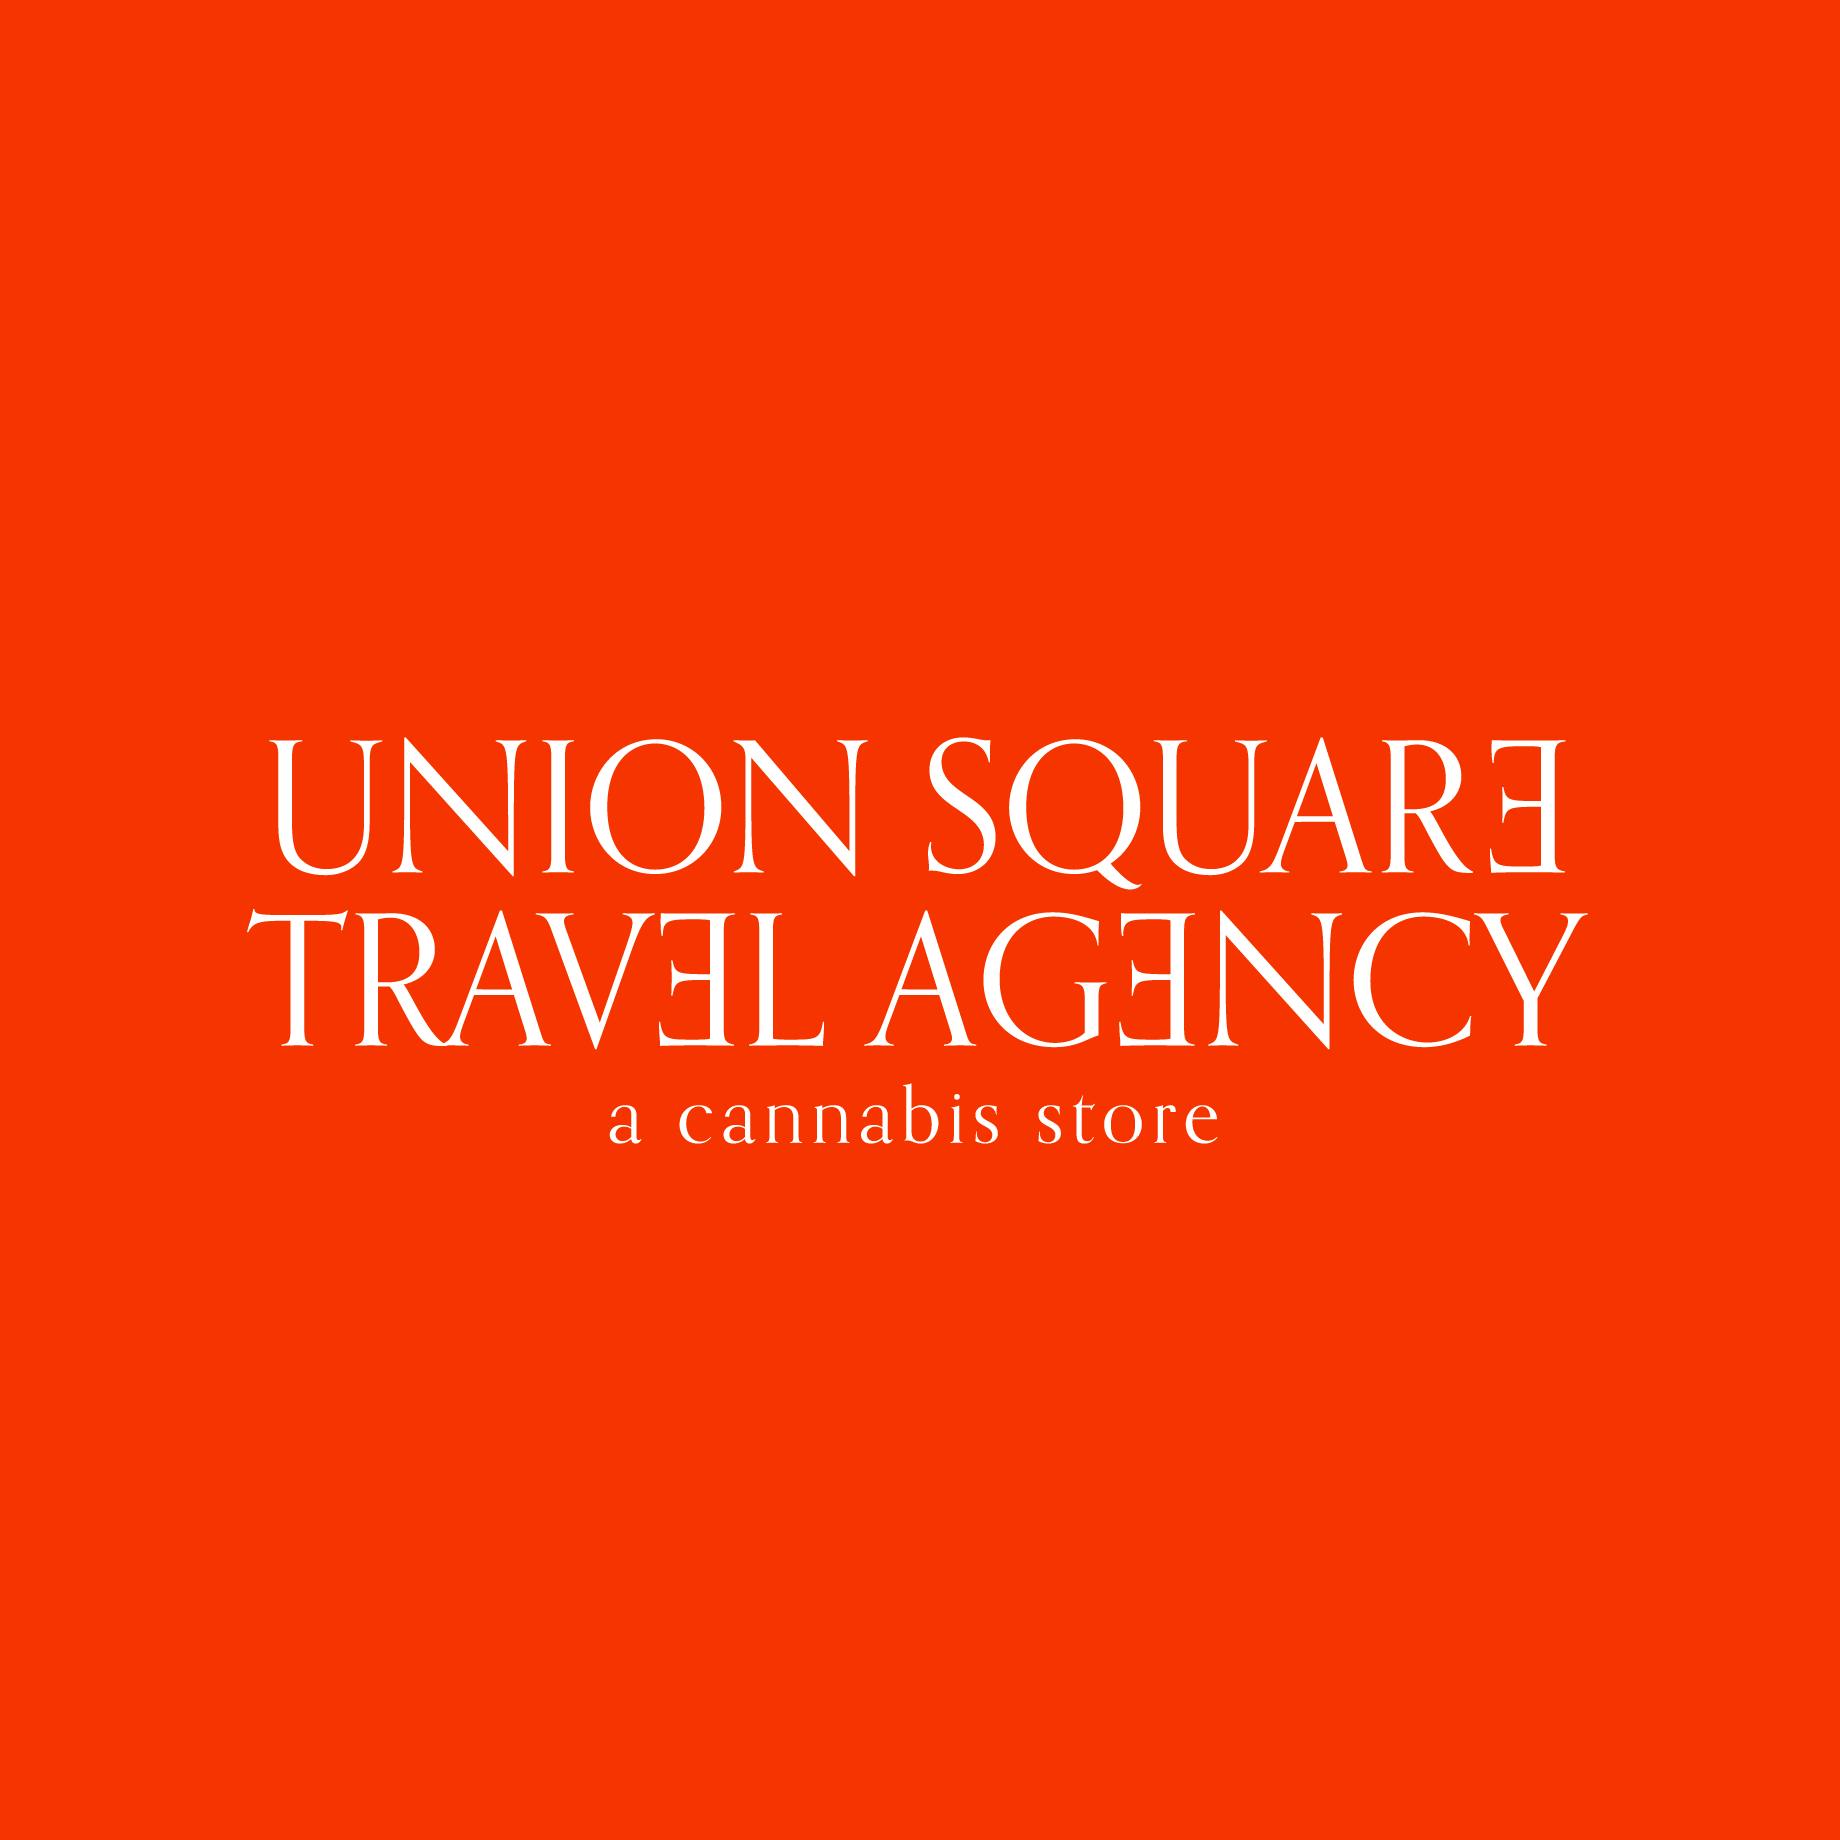 The Travel Agency: A Cannabis Store-logo